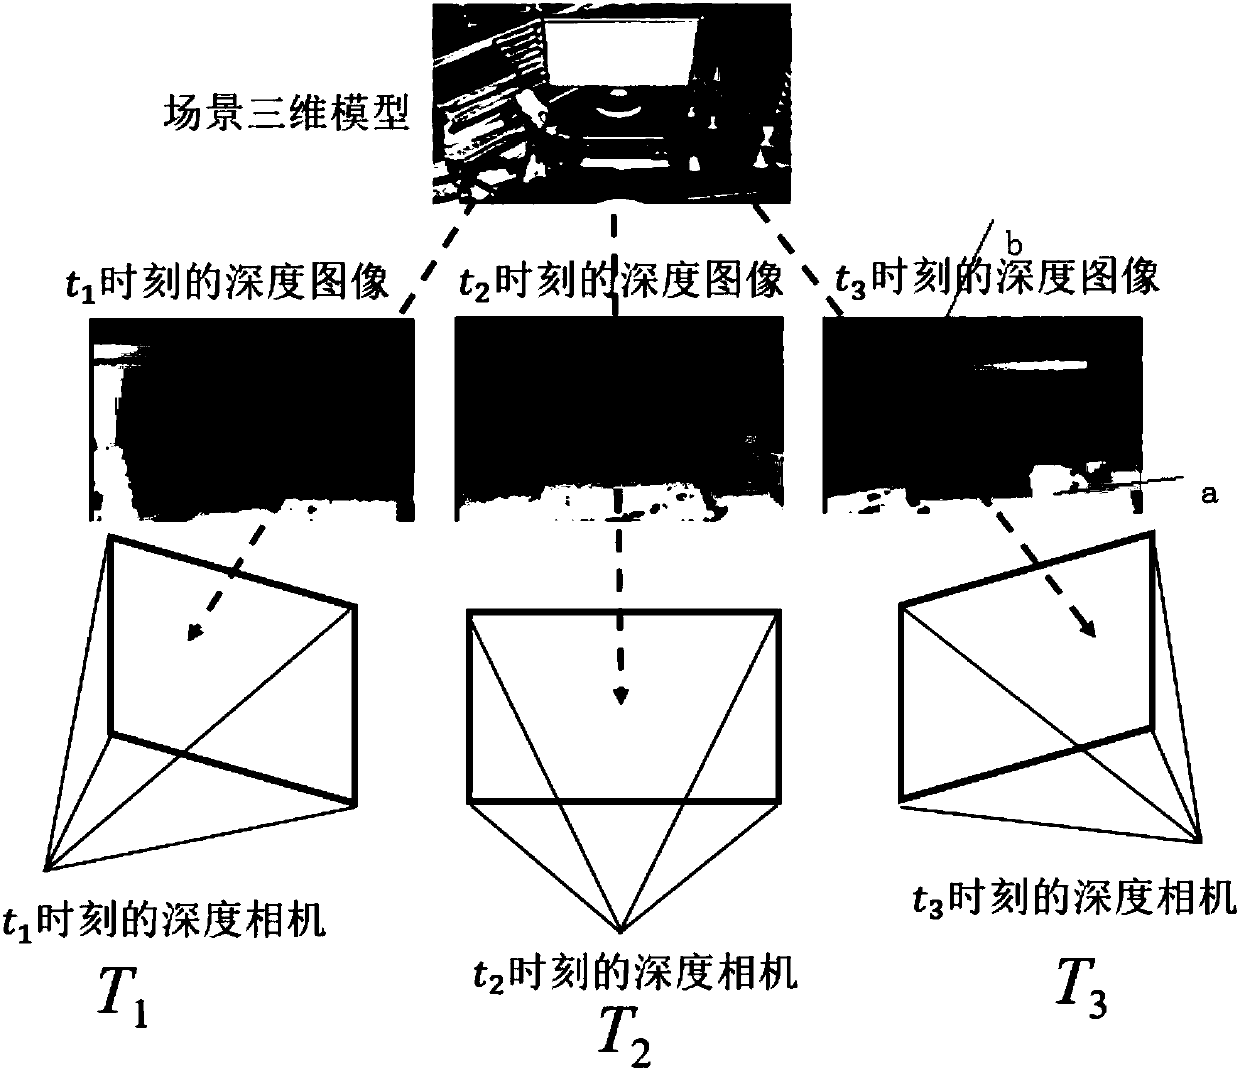 A method and apparatus for aligning three-dimensional point clouds